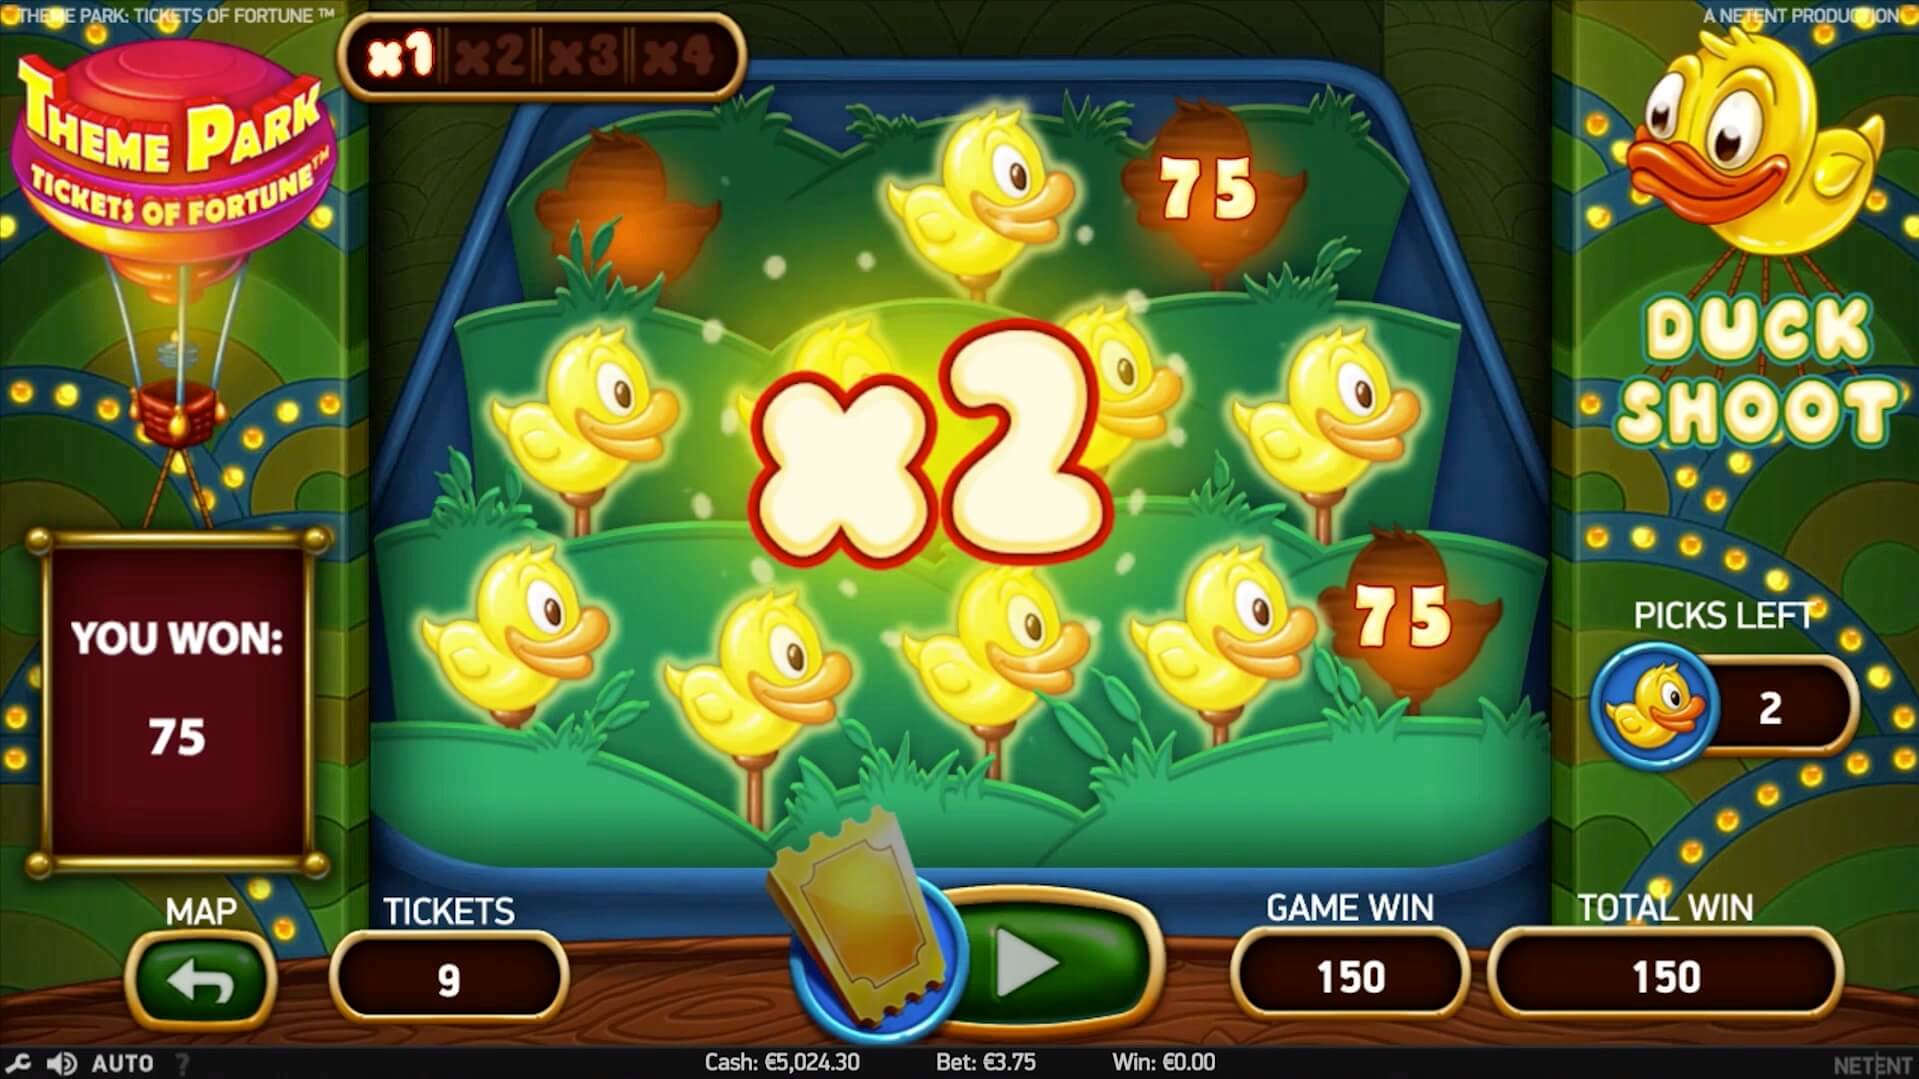 theme park tickets of fortune slot